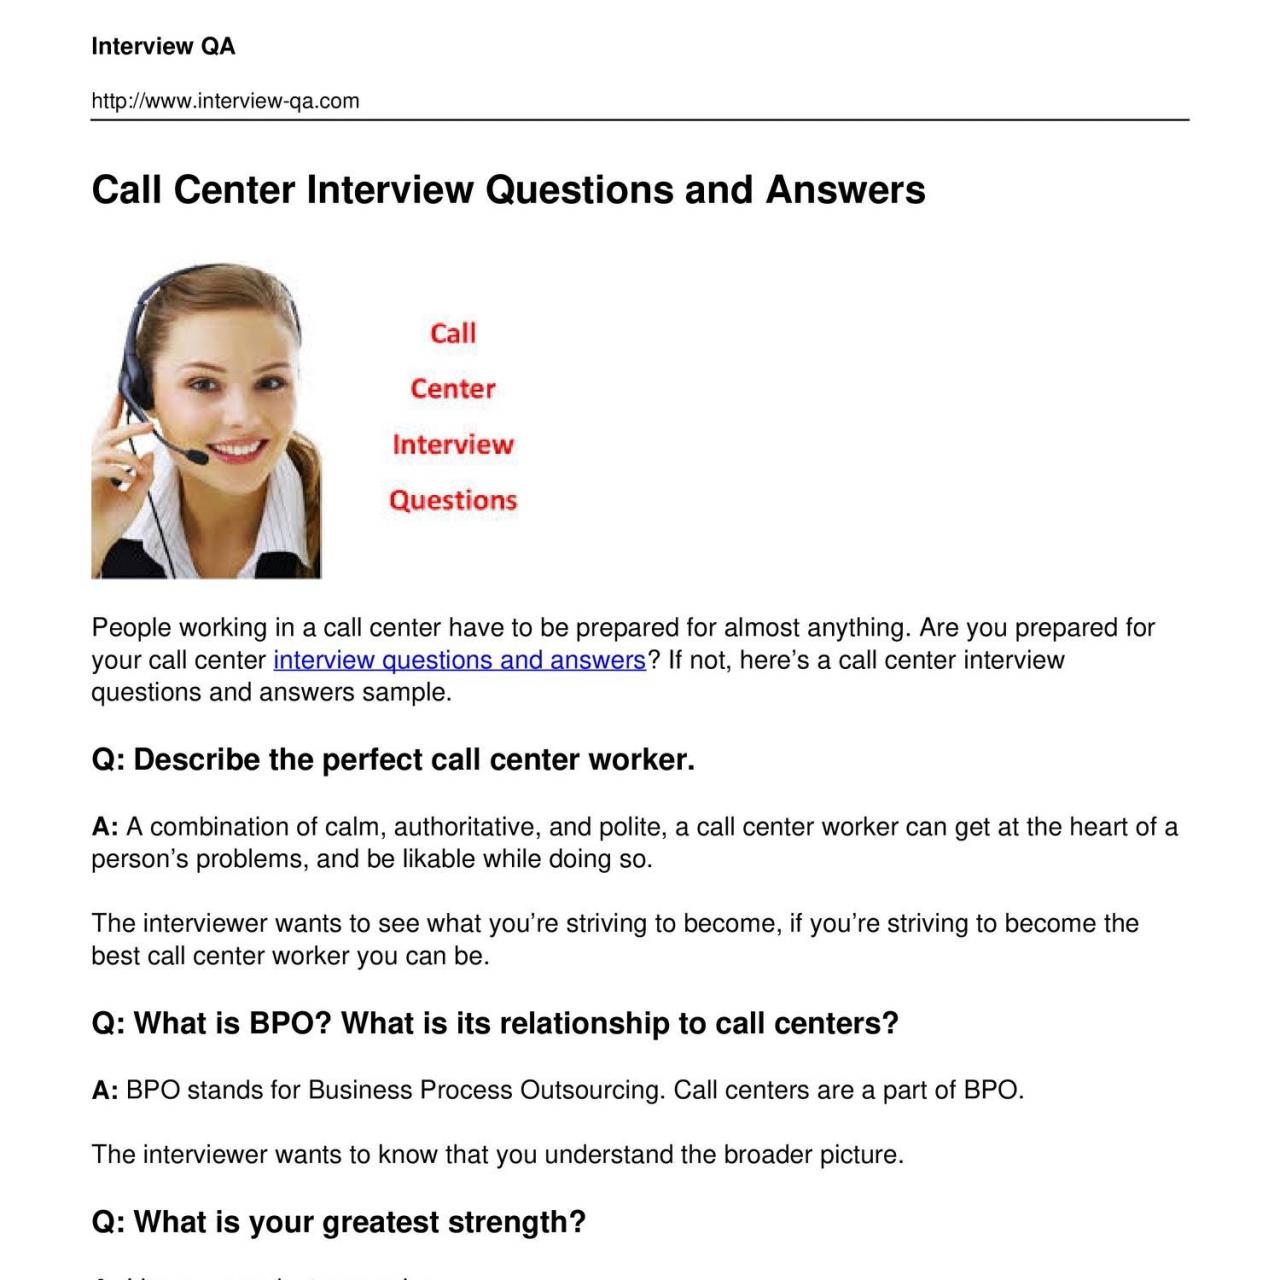 Common questions in an interview for call center agents